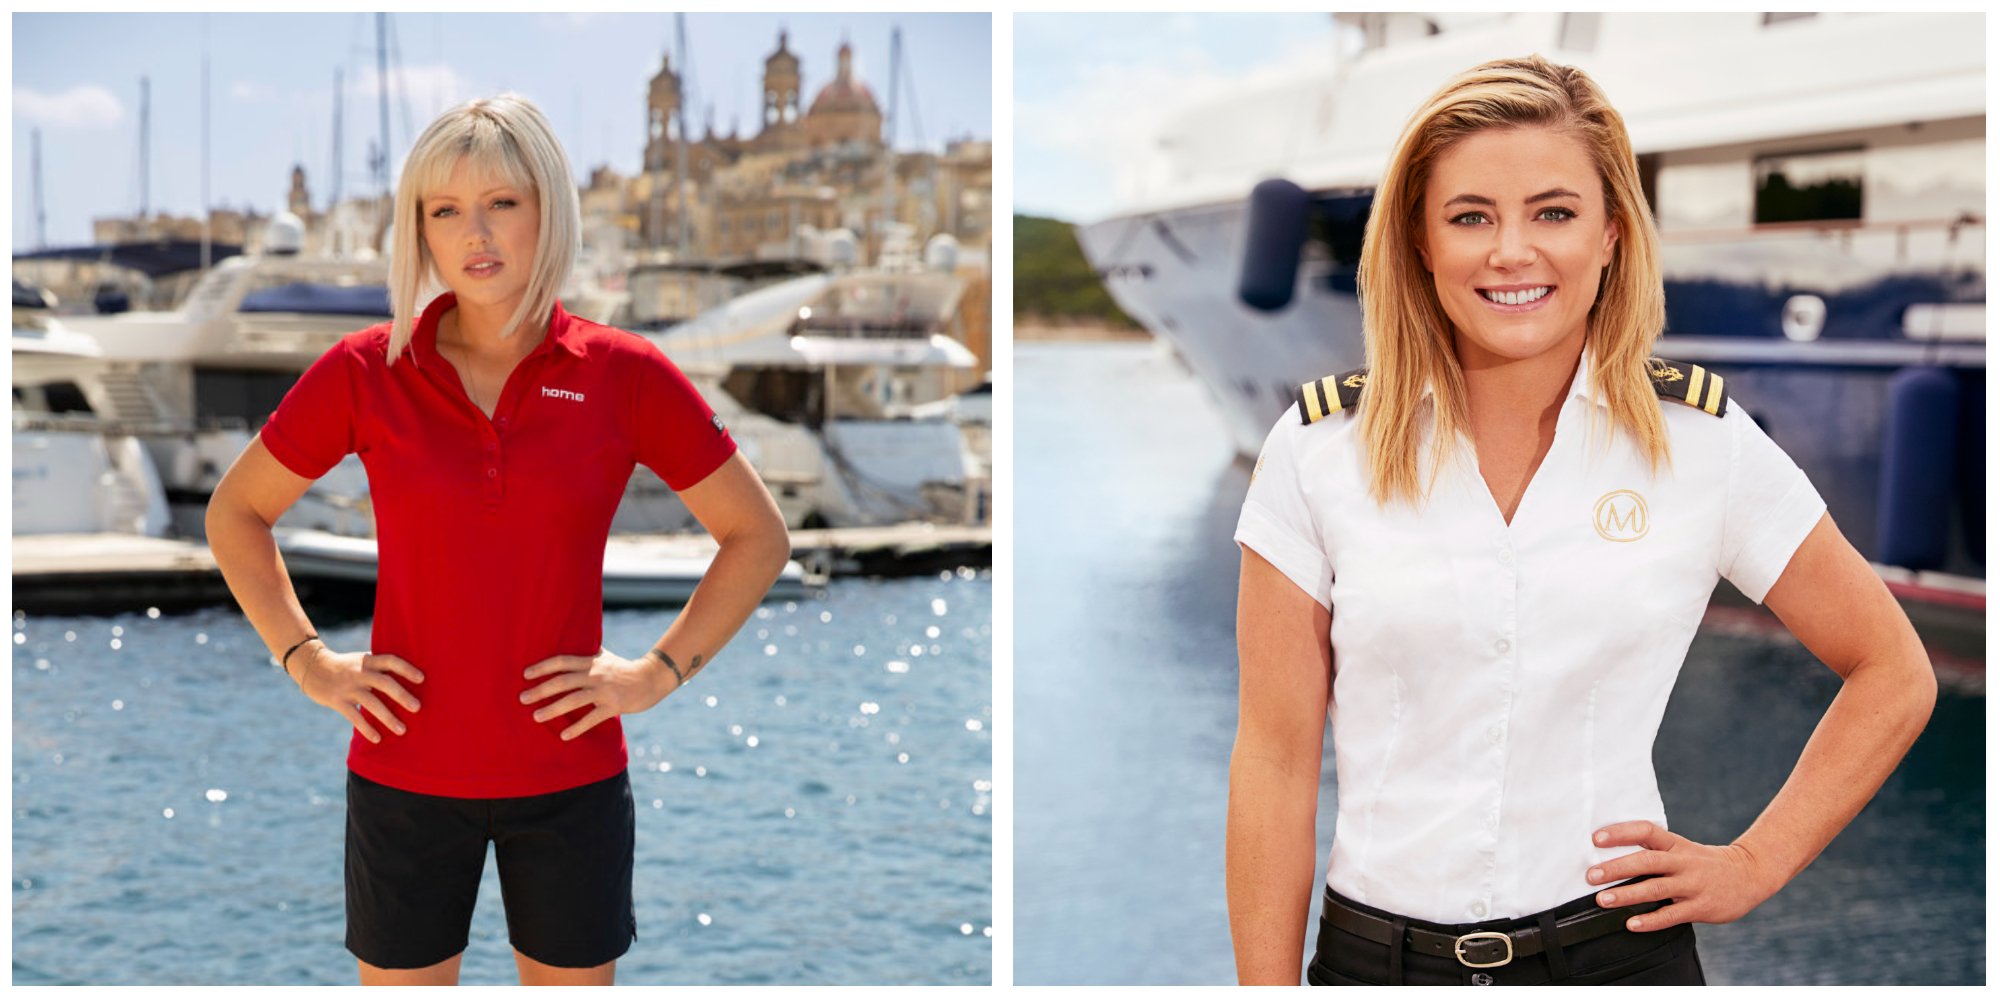 Raygan Tyler and Malia White 'Below Deck Med' cast photos posed on a dock in front of a yacht